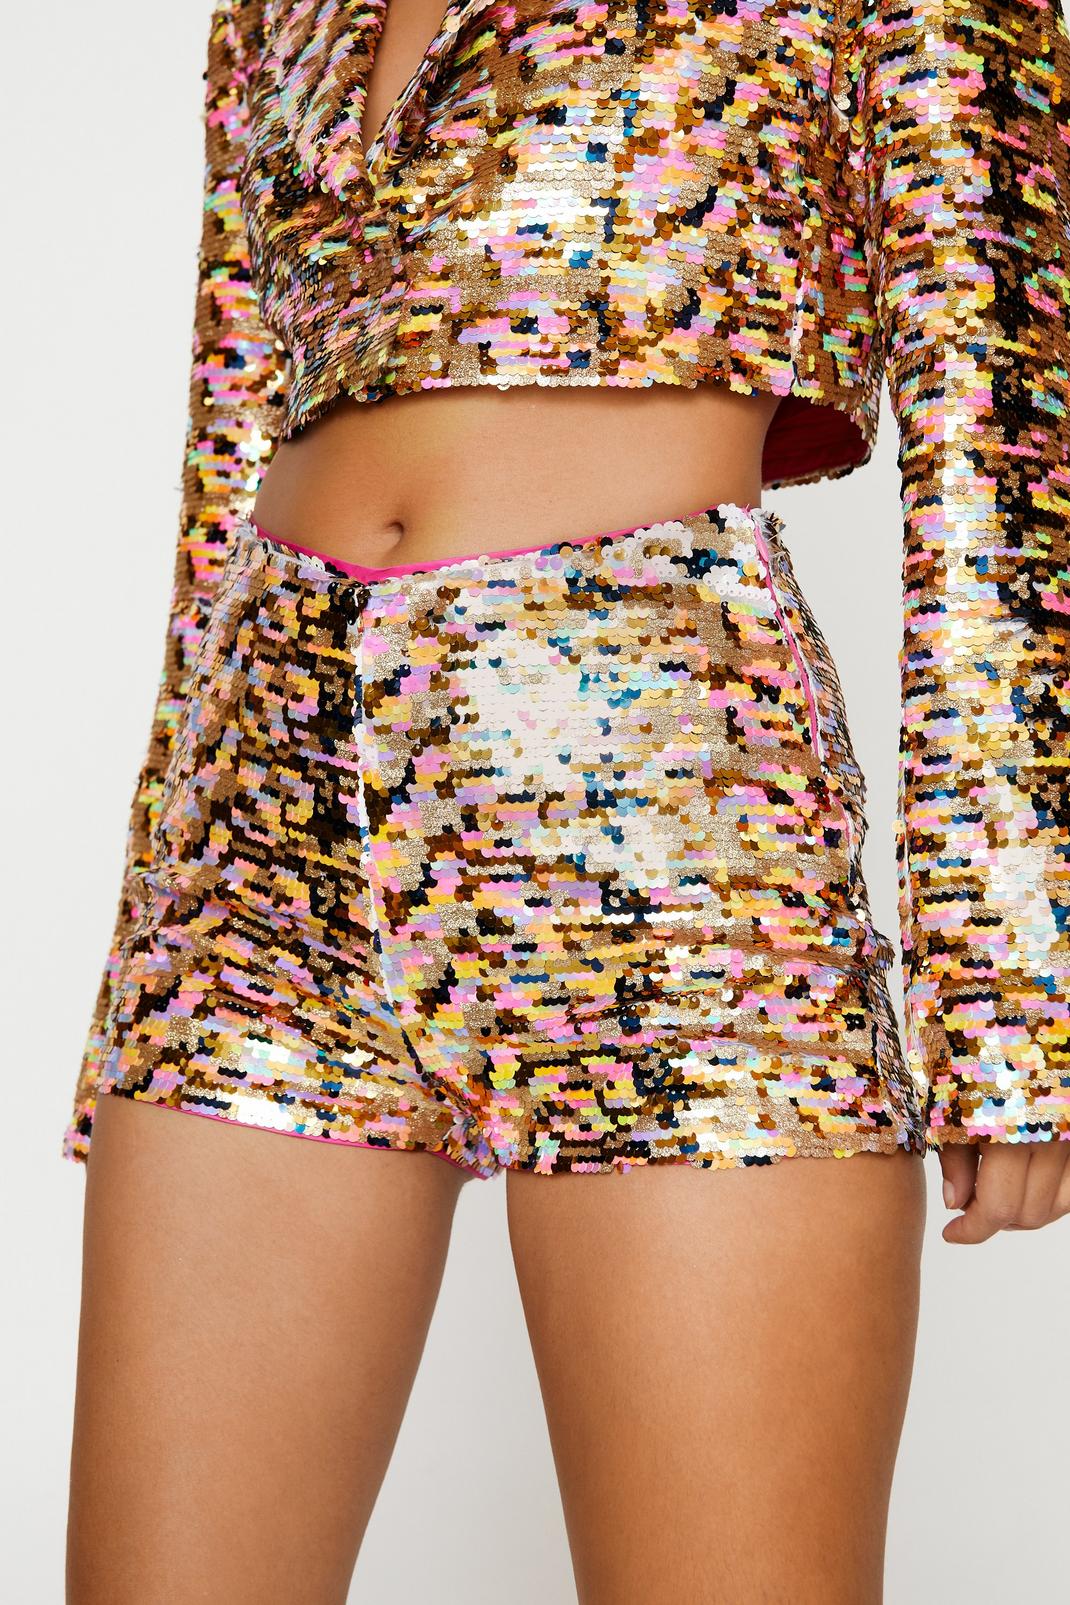 Gold Glitter Sequin Booty Shorts Shorts image number 1